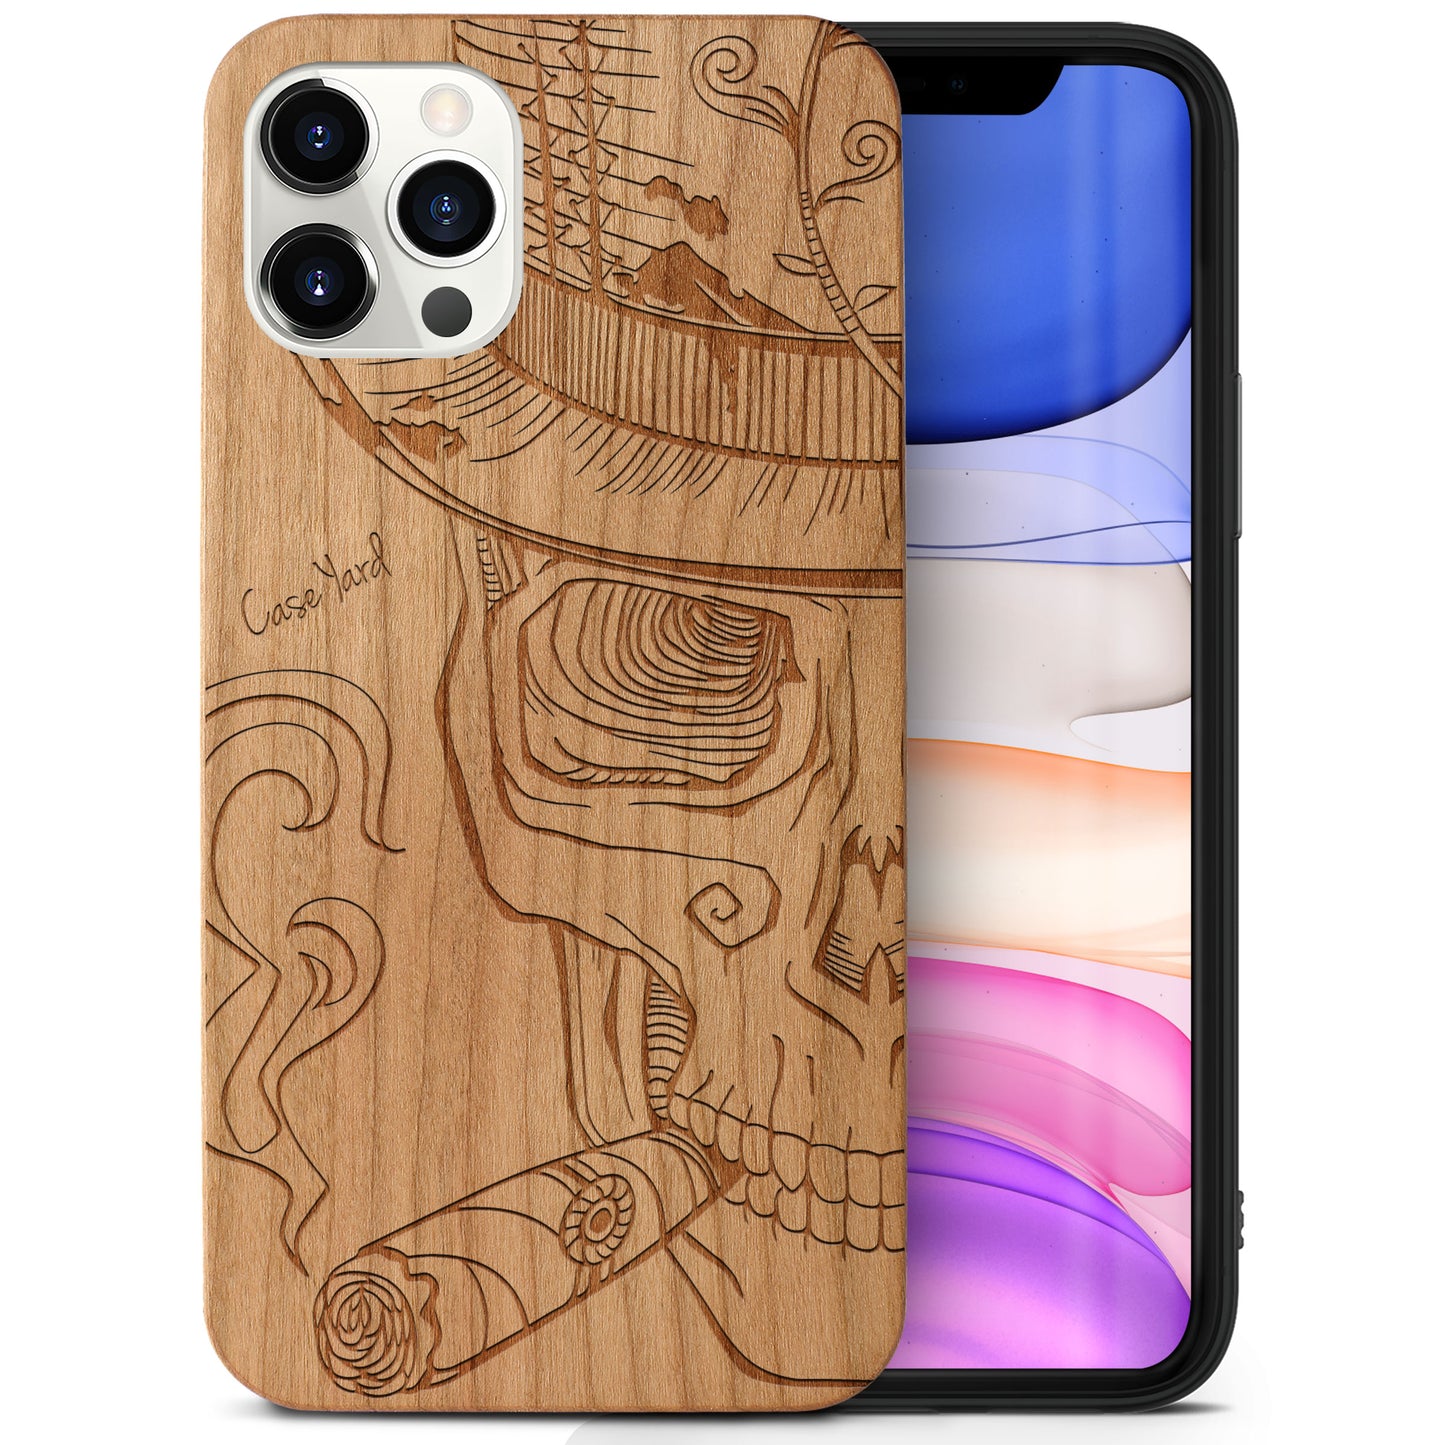 Wooden Cell Phone Case Cover, Laser Engraved case for iPhone & Samsung phone New Orleans Sugar Skull Design